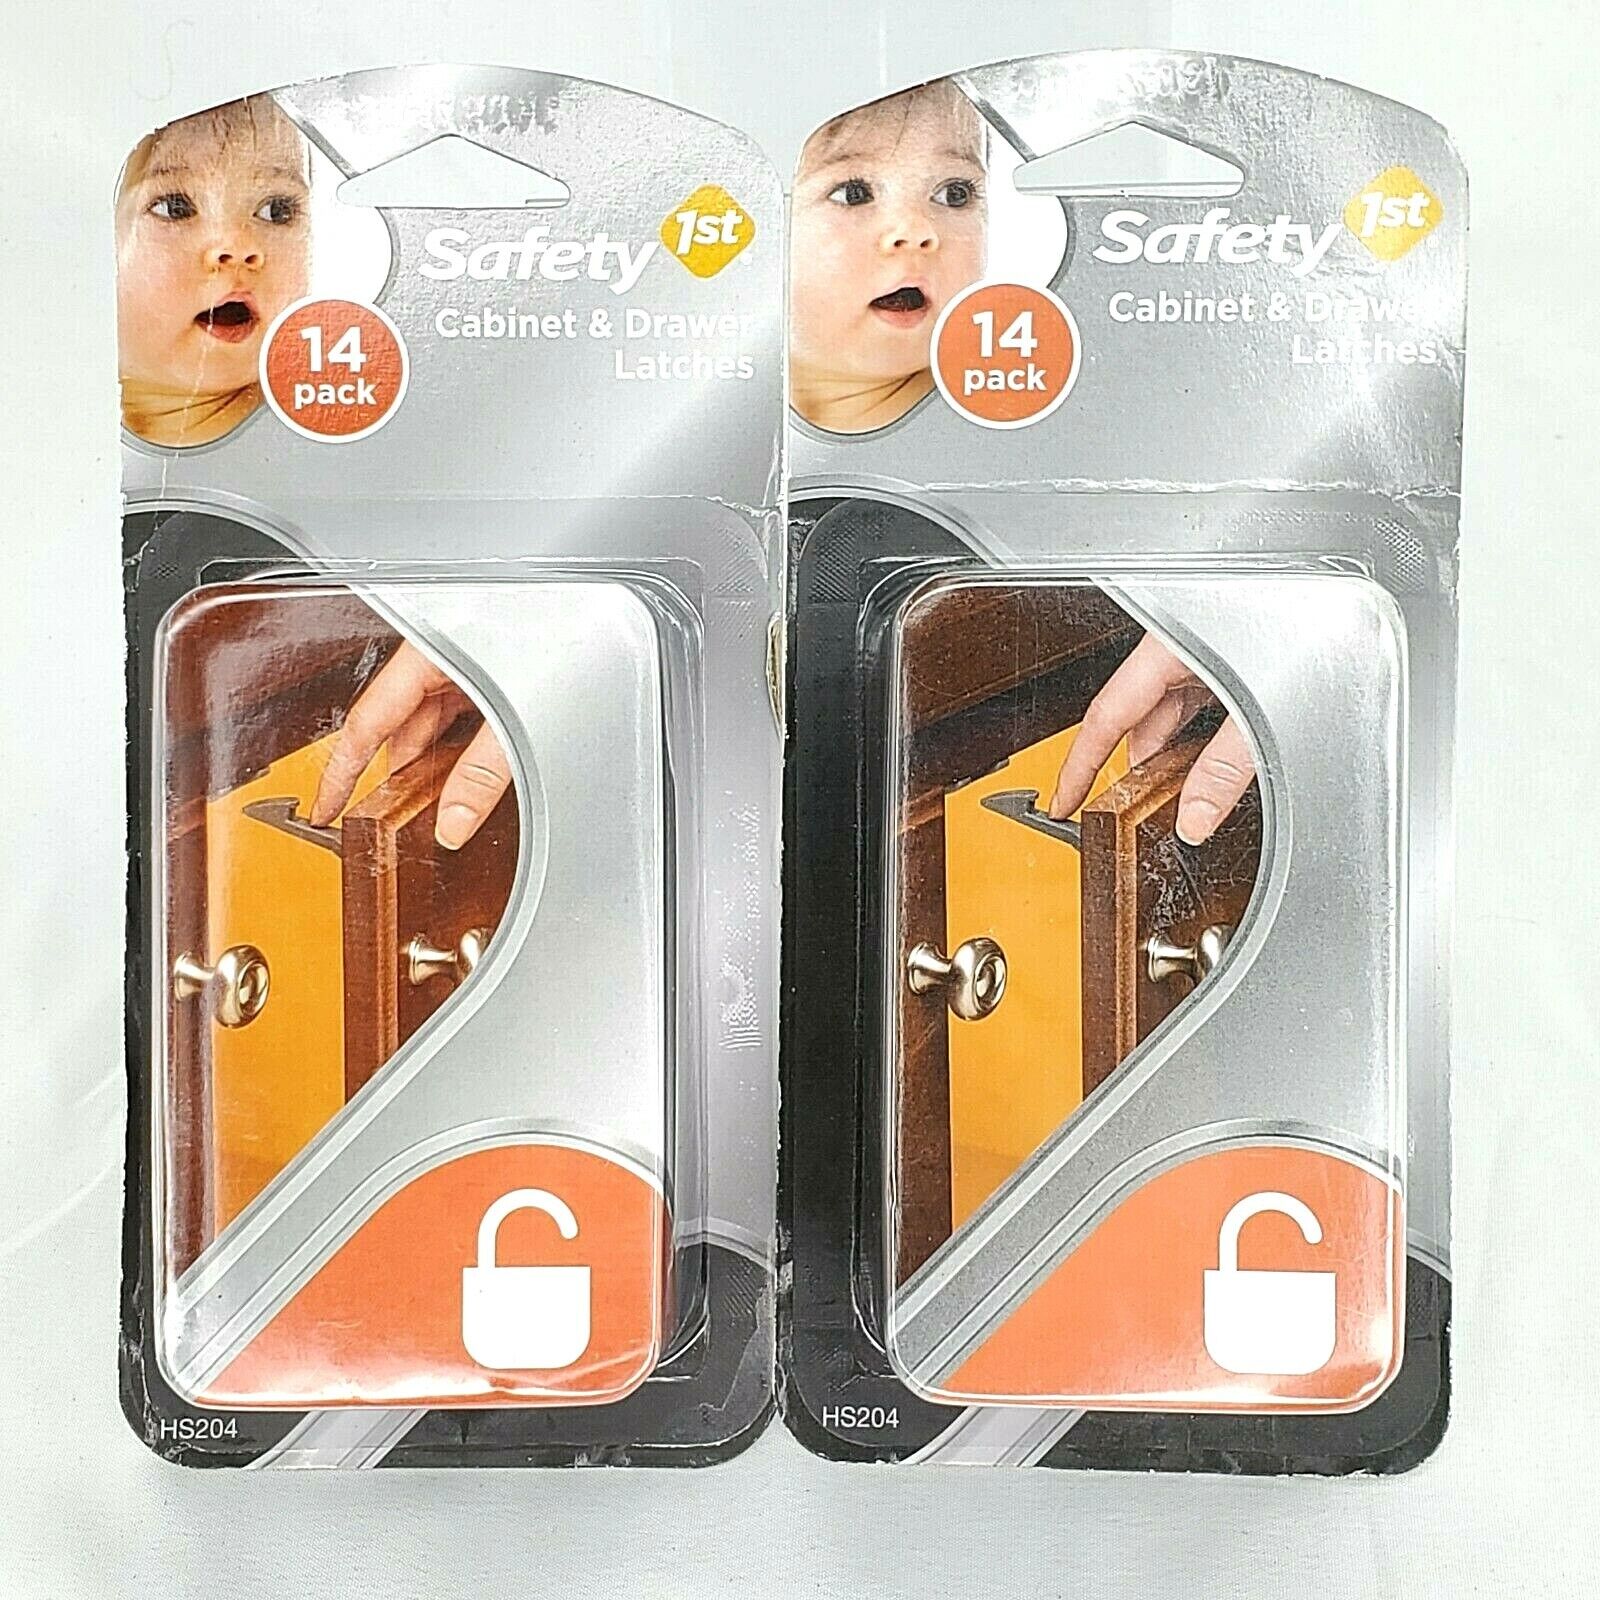 Qty 2 ~ Safety 1st 14 Pack Wide Grip Cabinet Locks & Drawer Latches Child Proof Safety 1st HS204